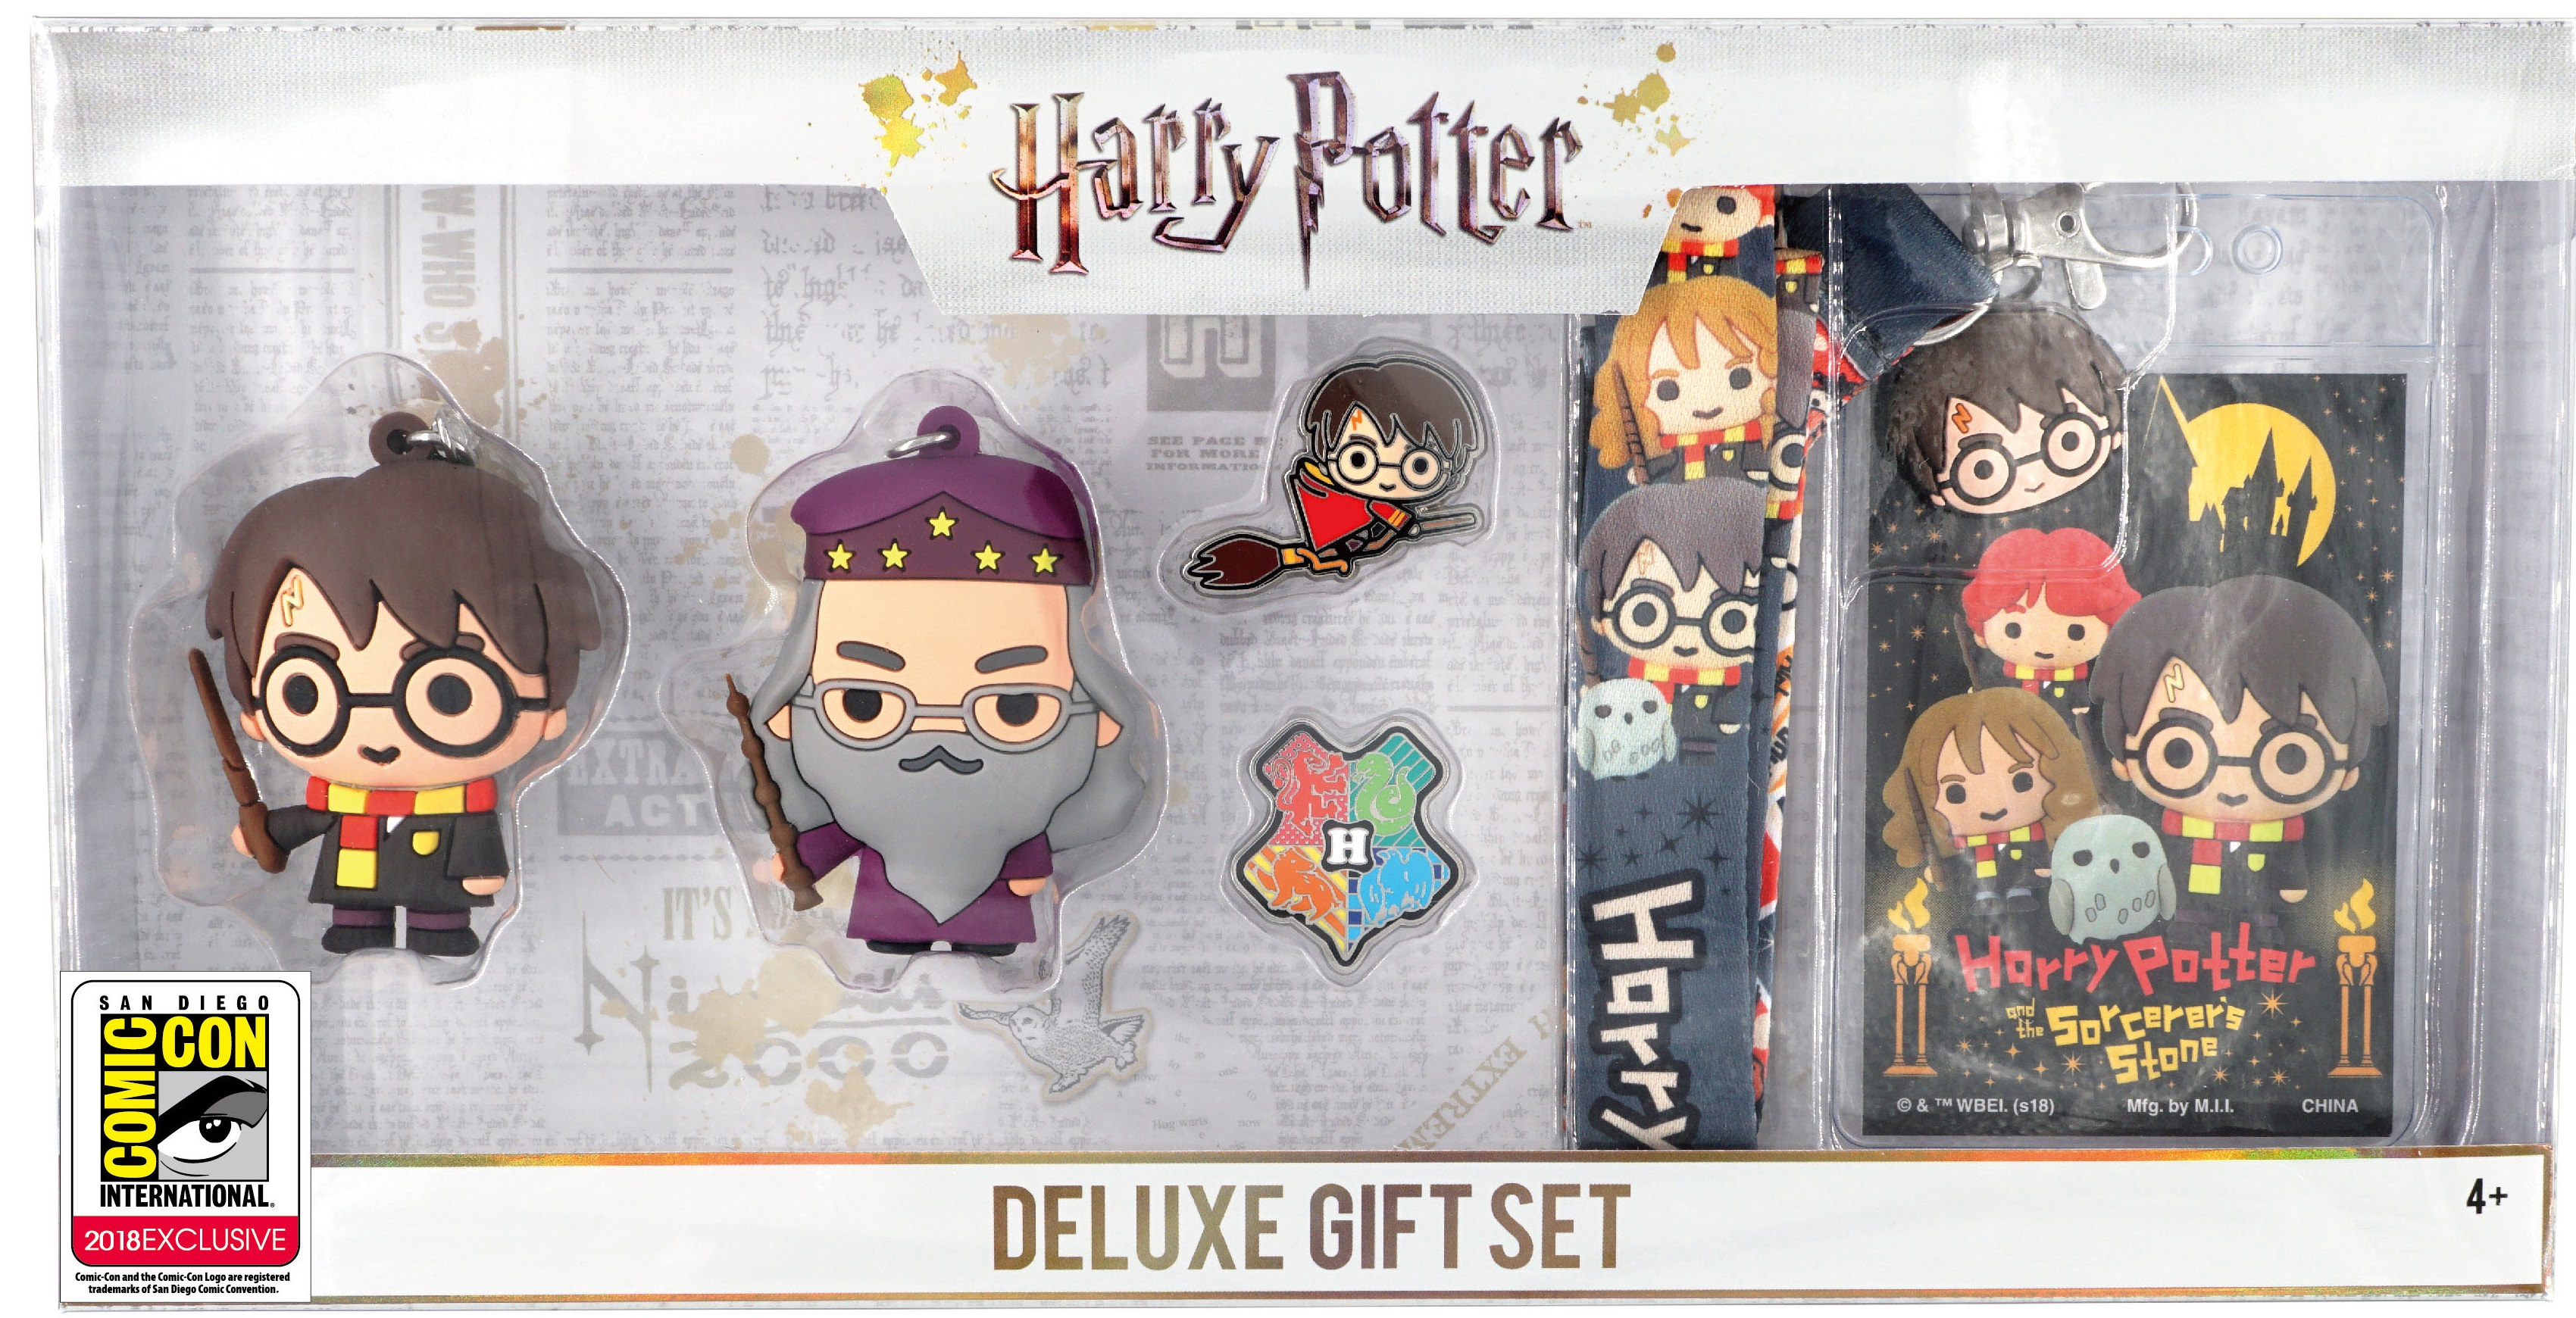 2018 SDCC Comic Con Summer Convention Exclusive HARRY POTTER Deluxe Gift Set